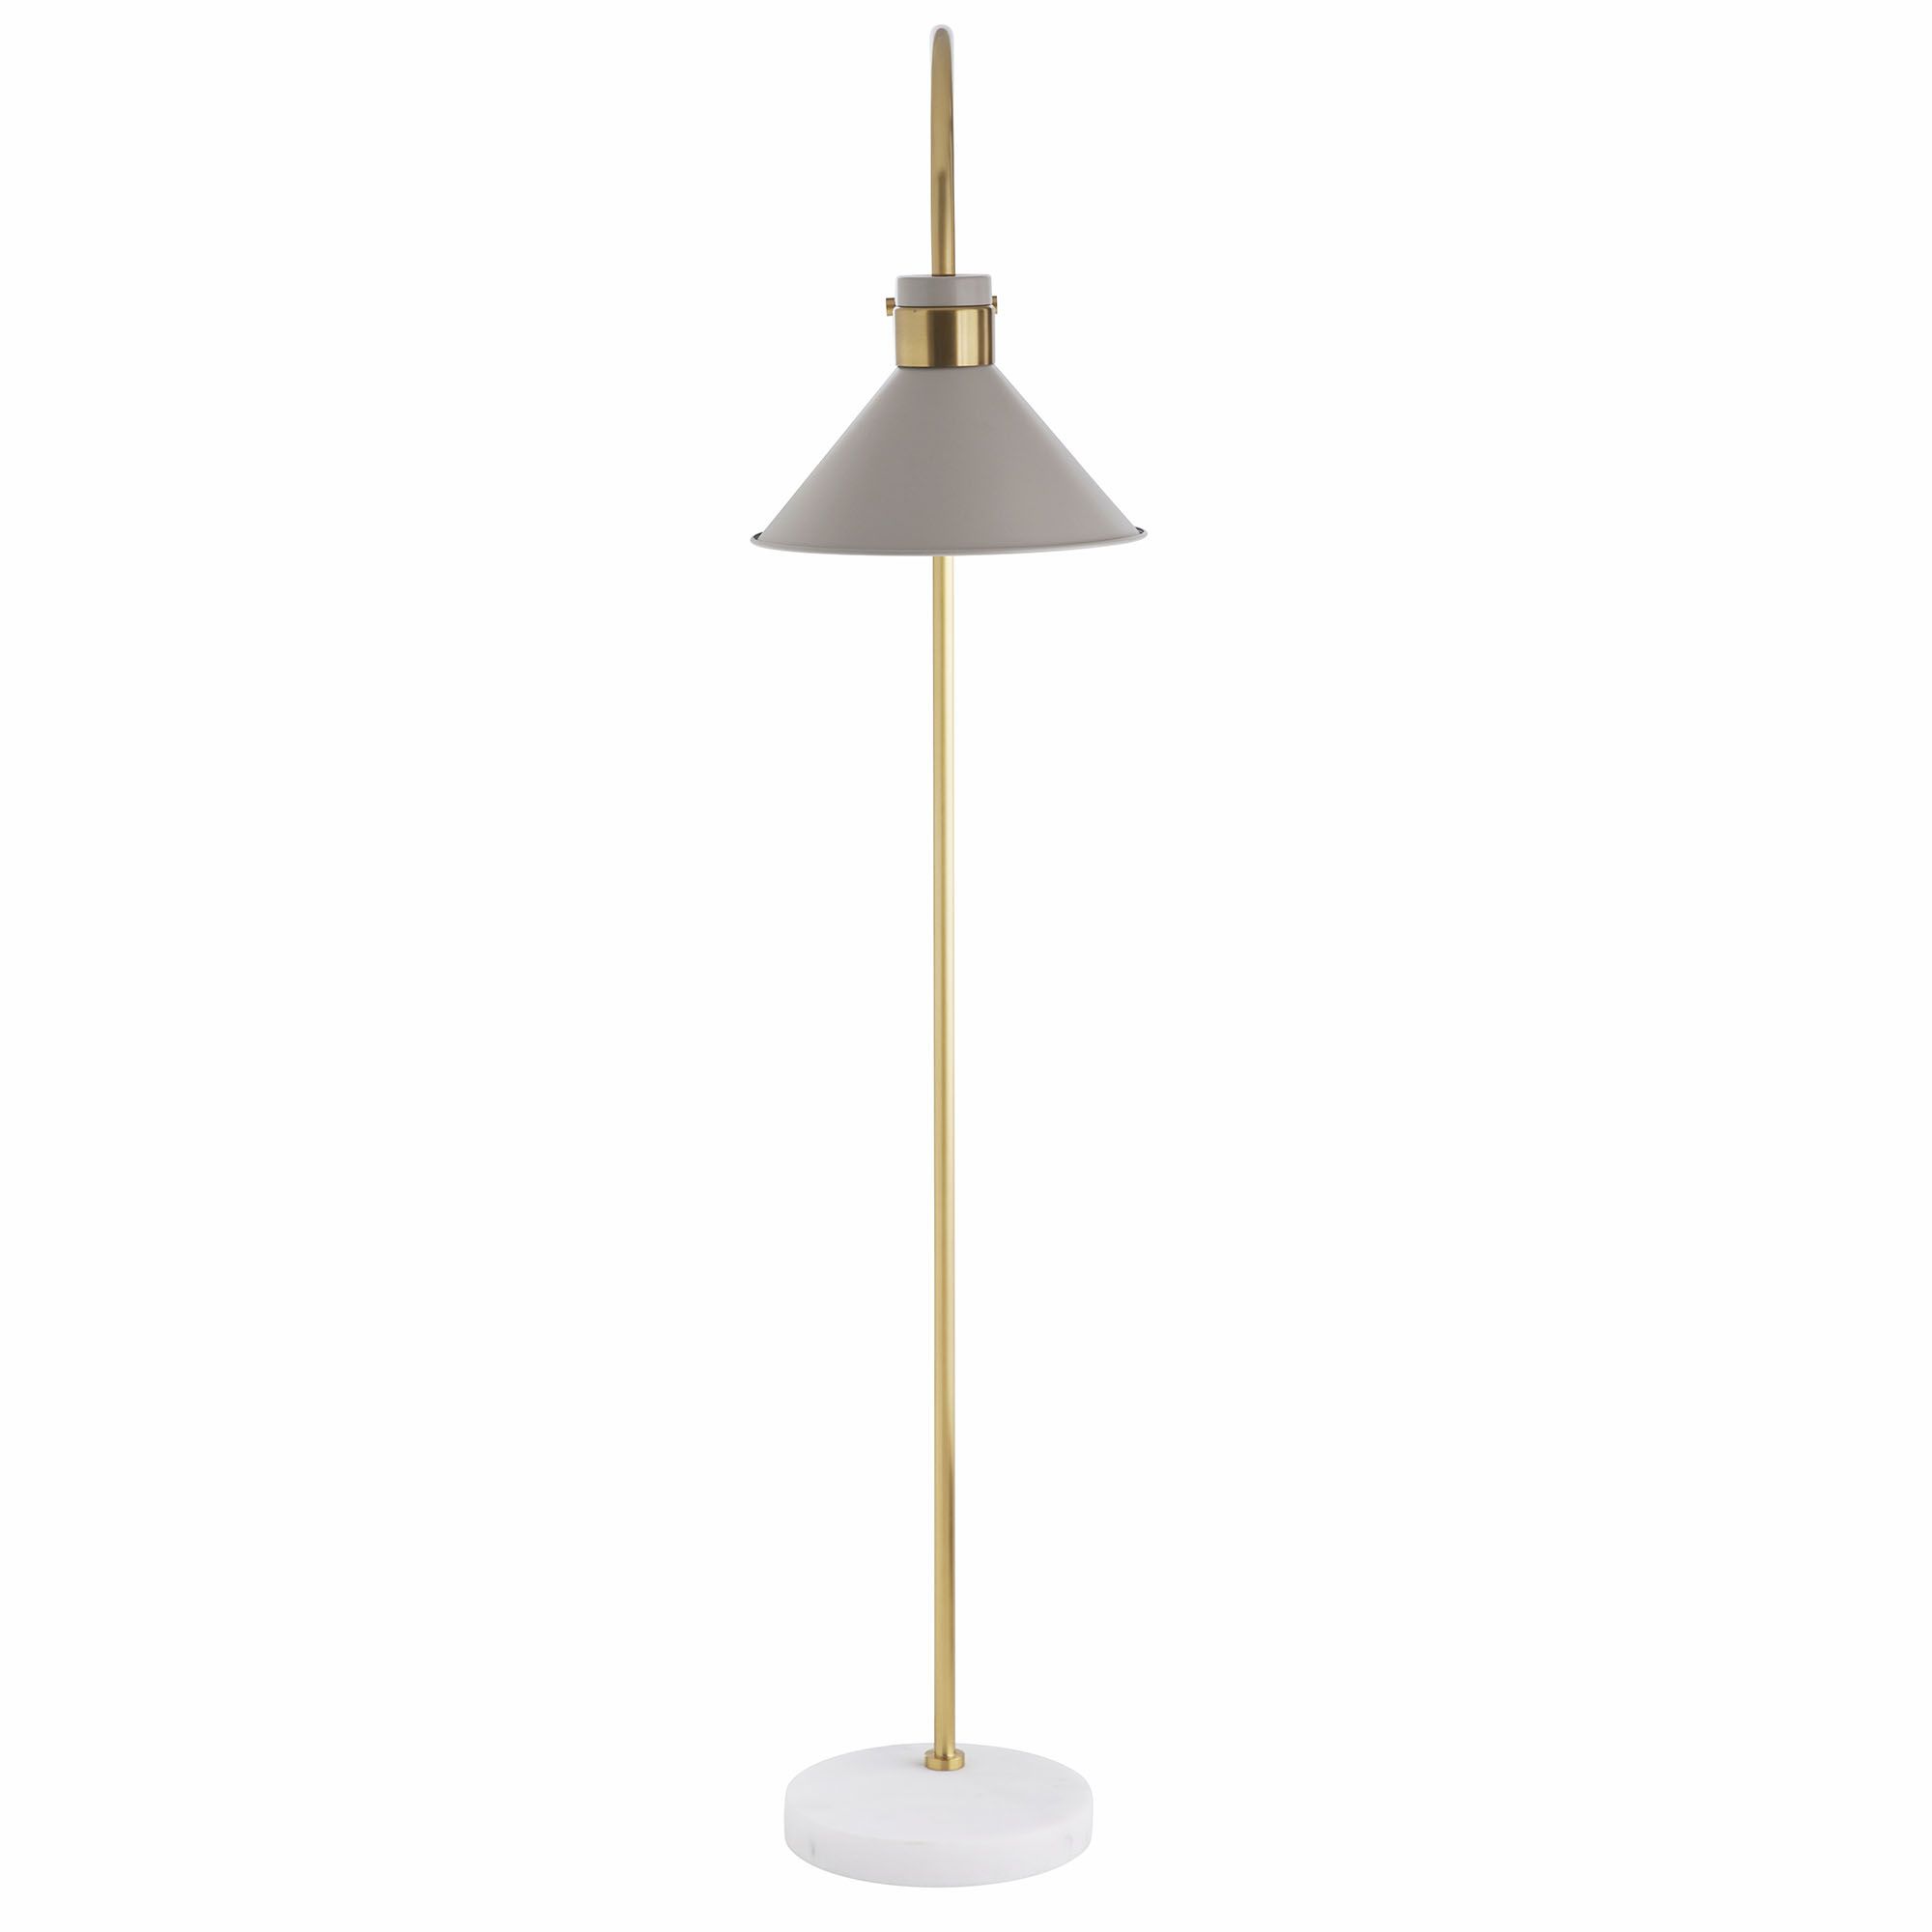 Taupe, Antique Brass, White